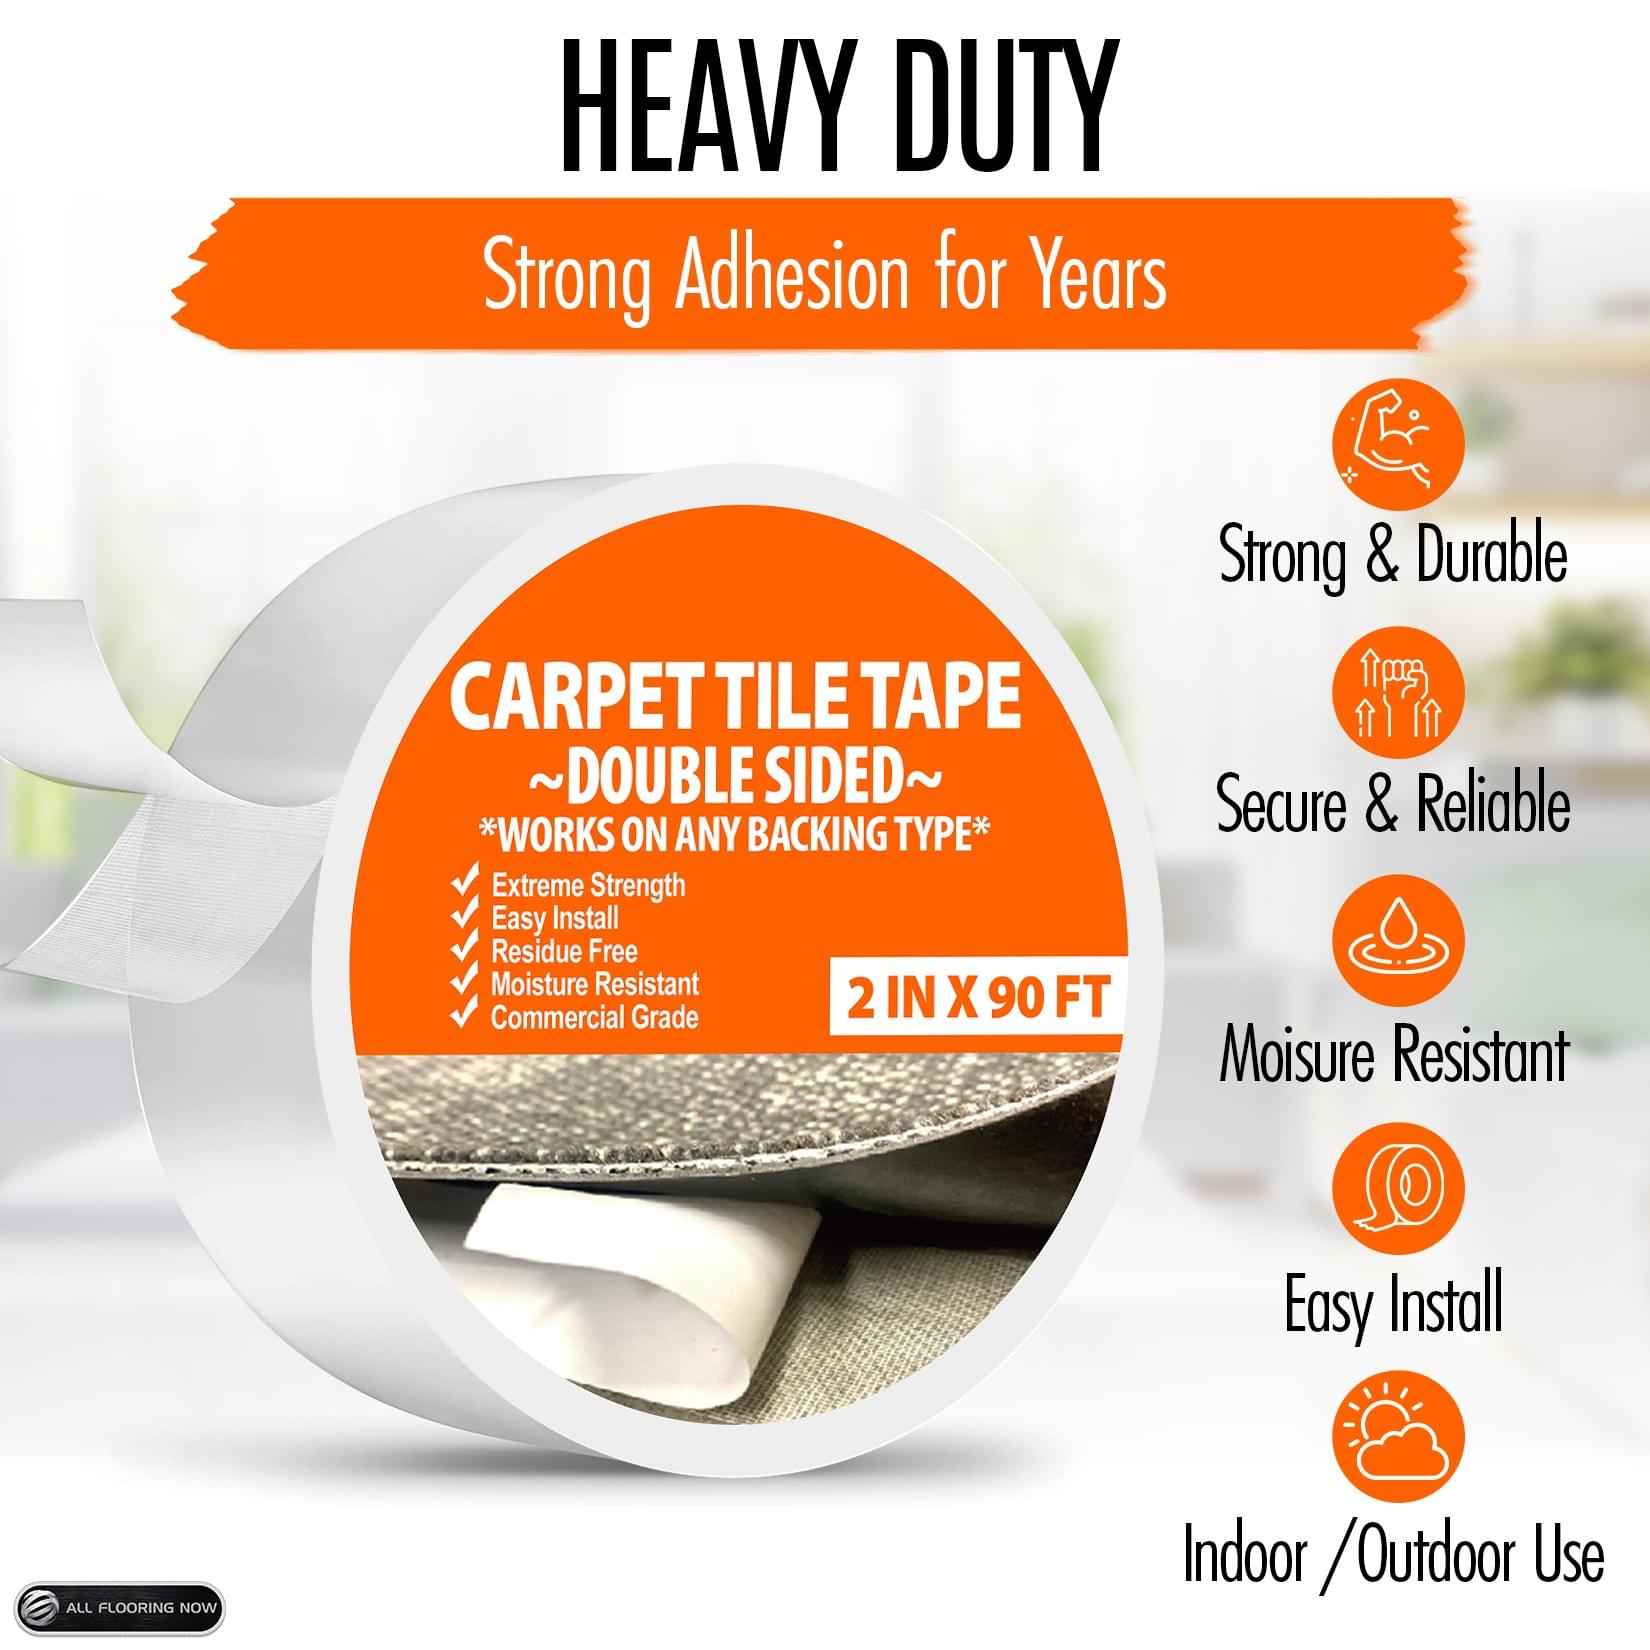 Carpet Tile Tape Heavy Duty Double Sided Stair Tread Tape 2 In x 90 Ft Strong Adhesive Tape, Rug Tape, Carpet Tile Tape, Tape for Hardwood Floors, Tape for Vinyl